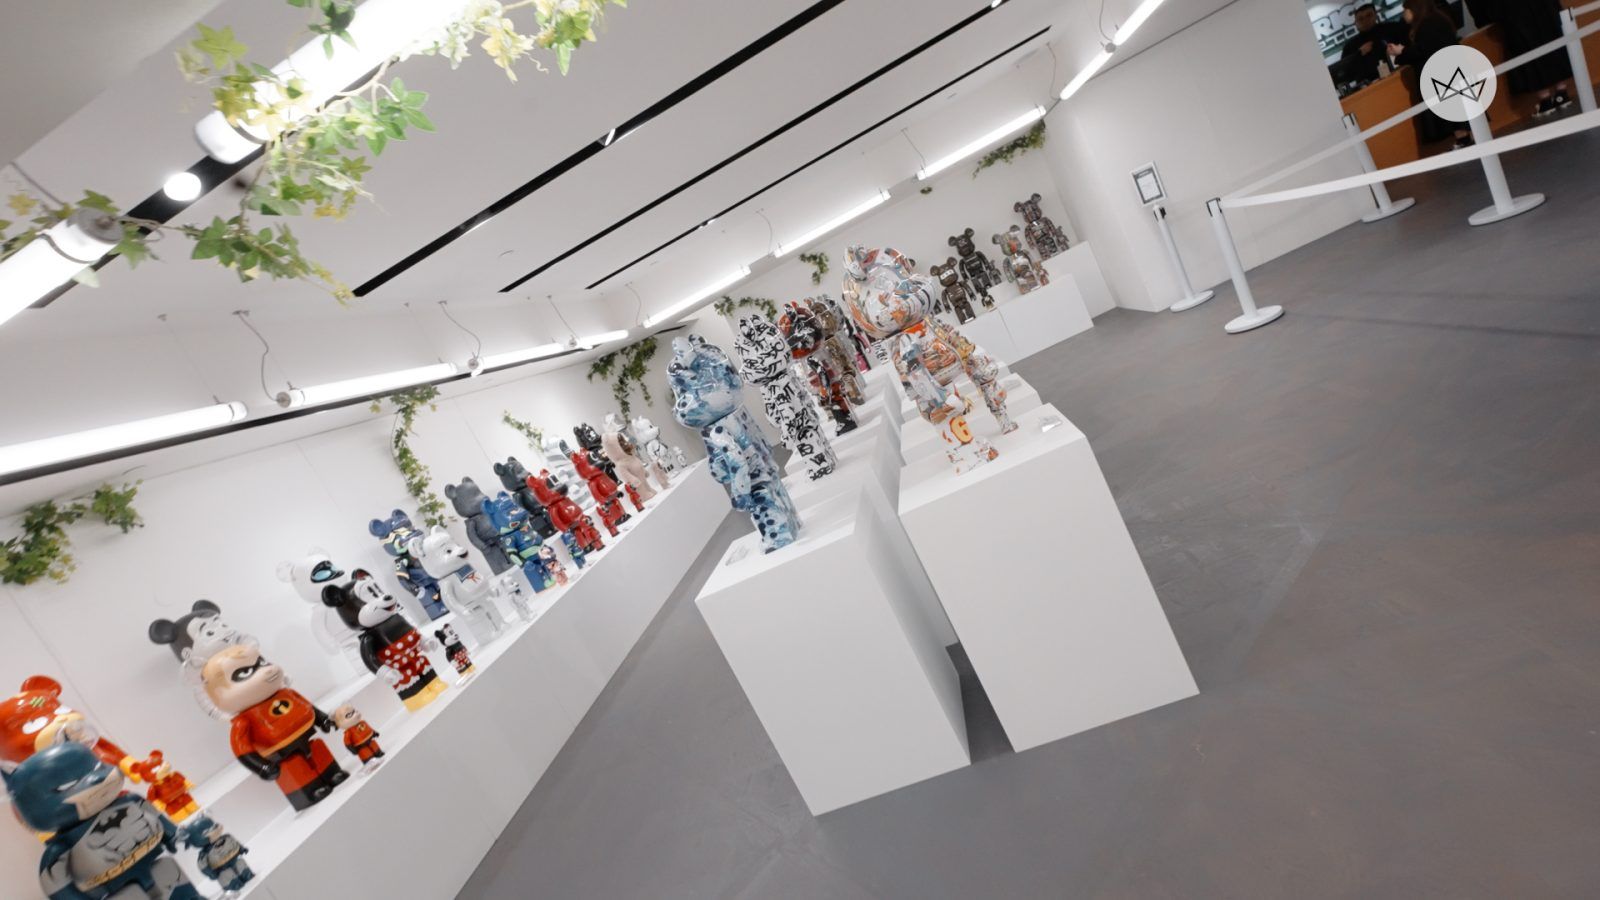 Medicom Toy founder on his latest BE@RBRICK exhibition at Artelli